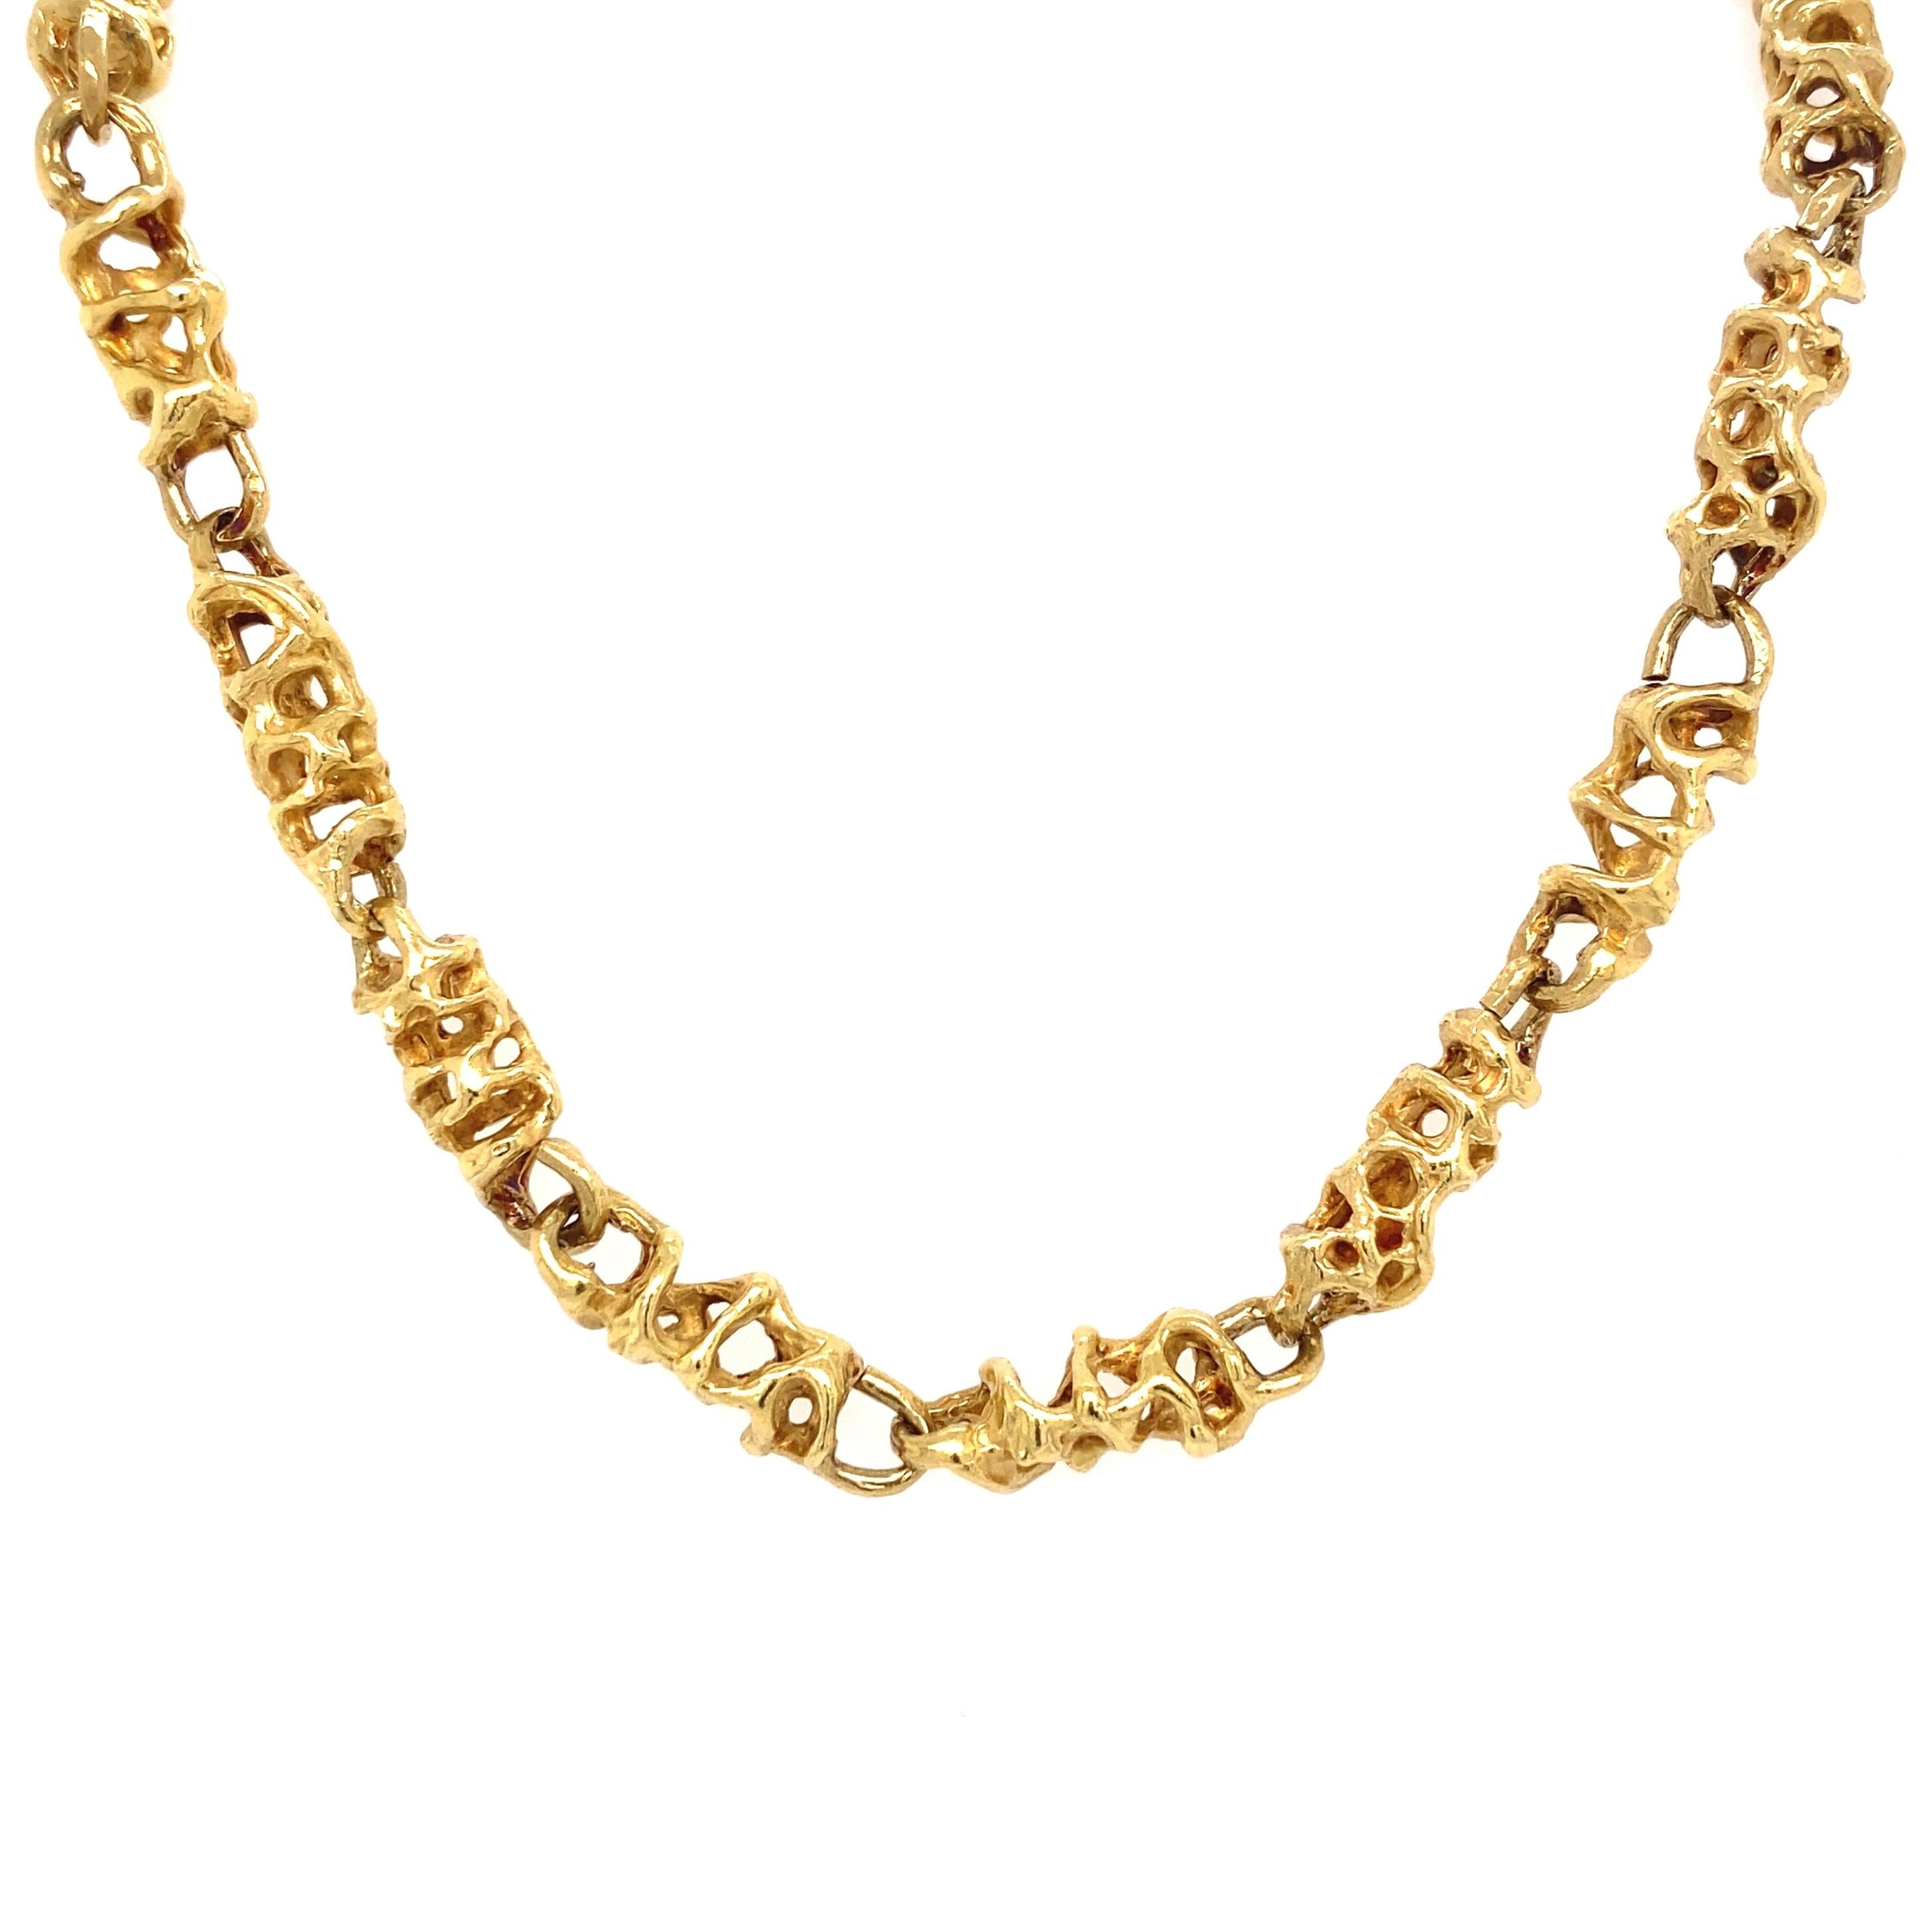 Fabulous High Quality heavy Solid 18K Yellow Gold Abstract open Chain Link Necklace by highly sought after Iconic Designer Ed Weiner. Beautifully Hand crafted by famed 20th Century Modernist Designer. Measuring approx. 25